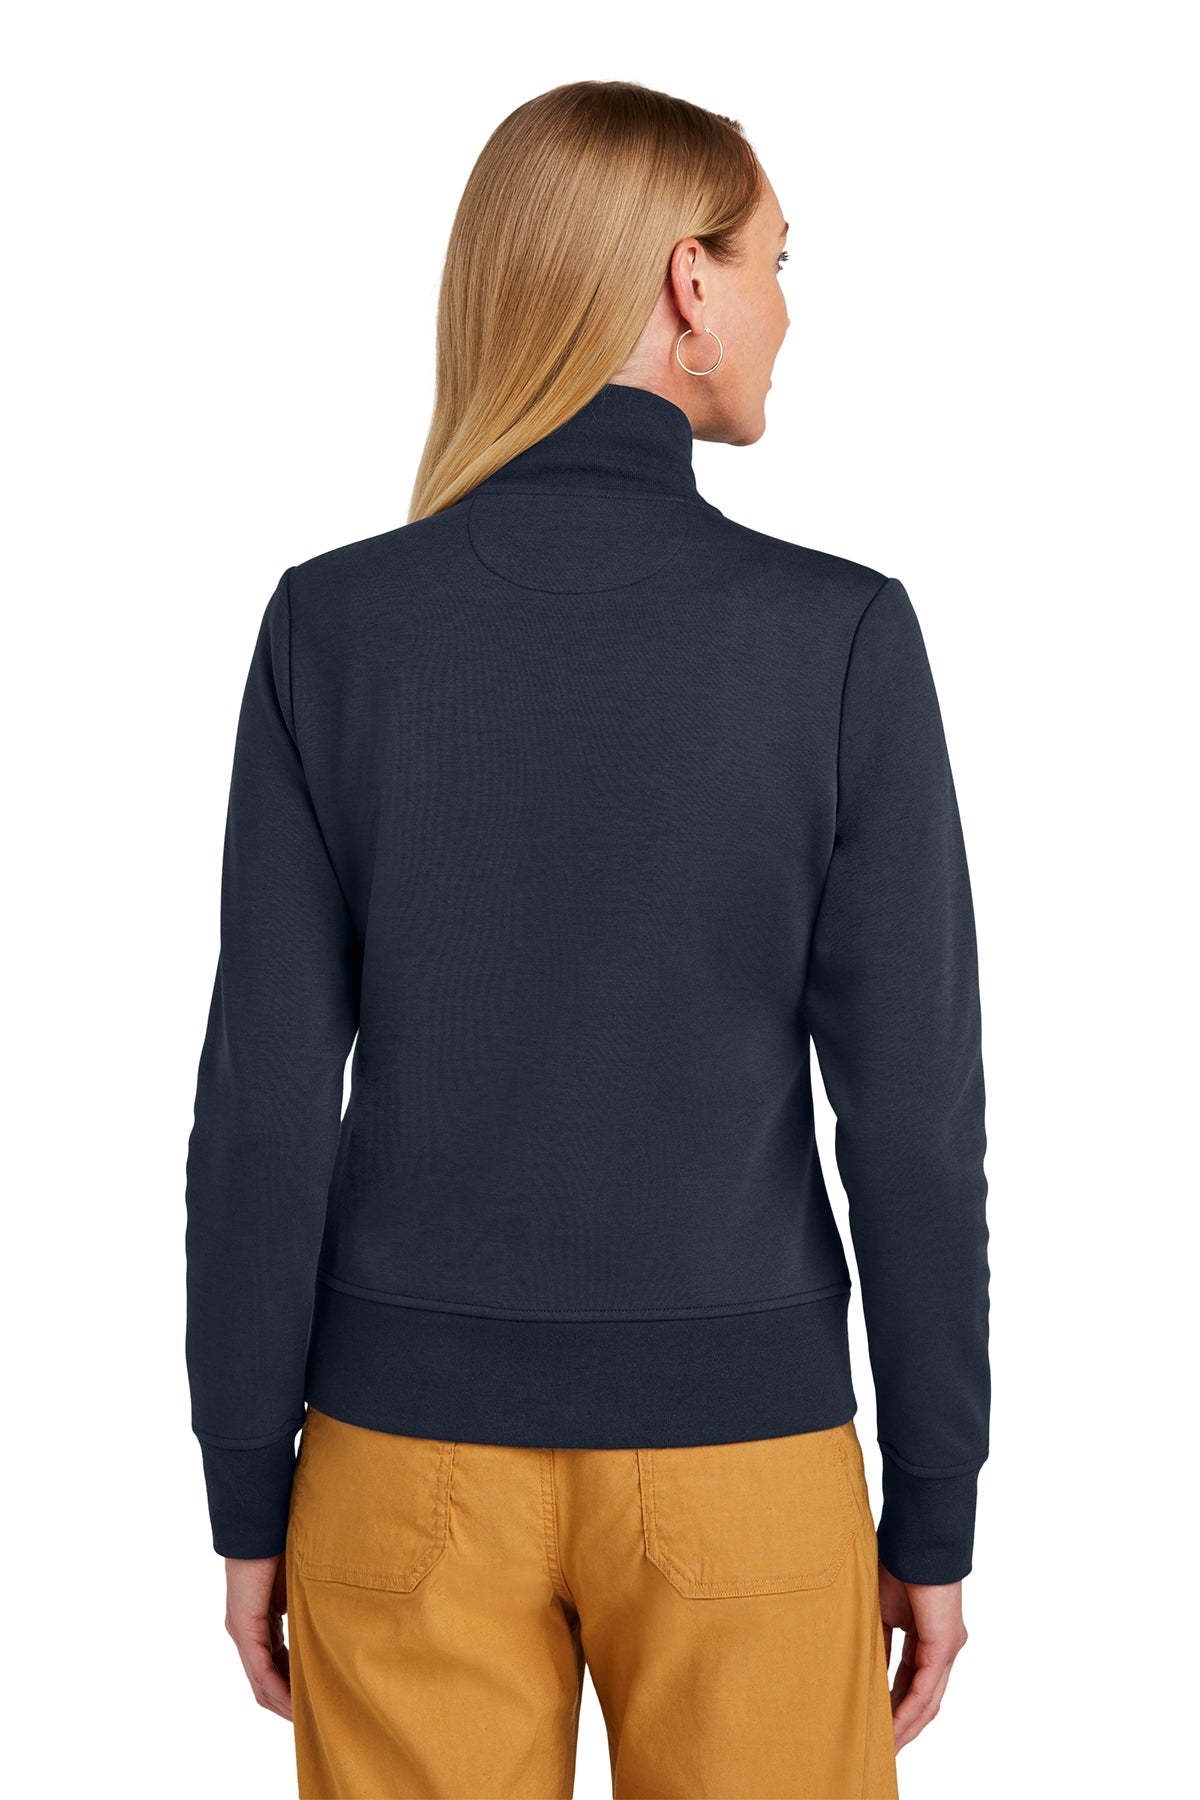 Brooks Brothers Womens Double-Knit Full-Zip, Night Navy